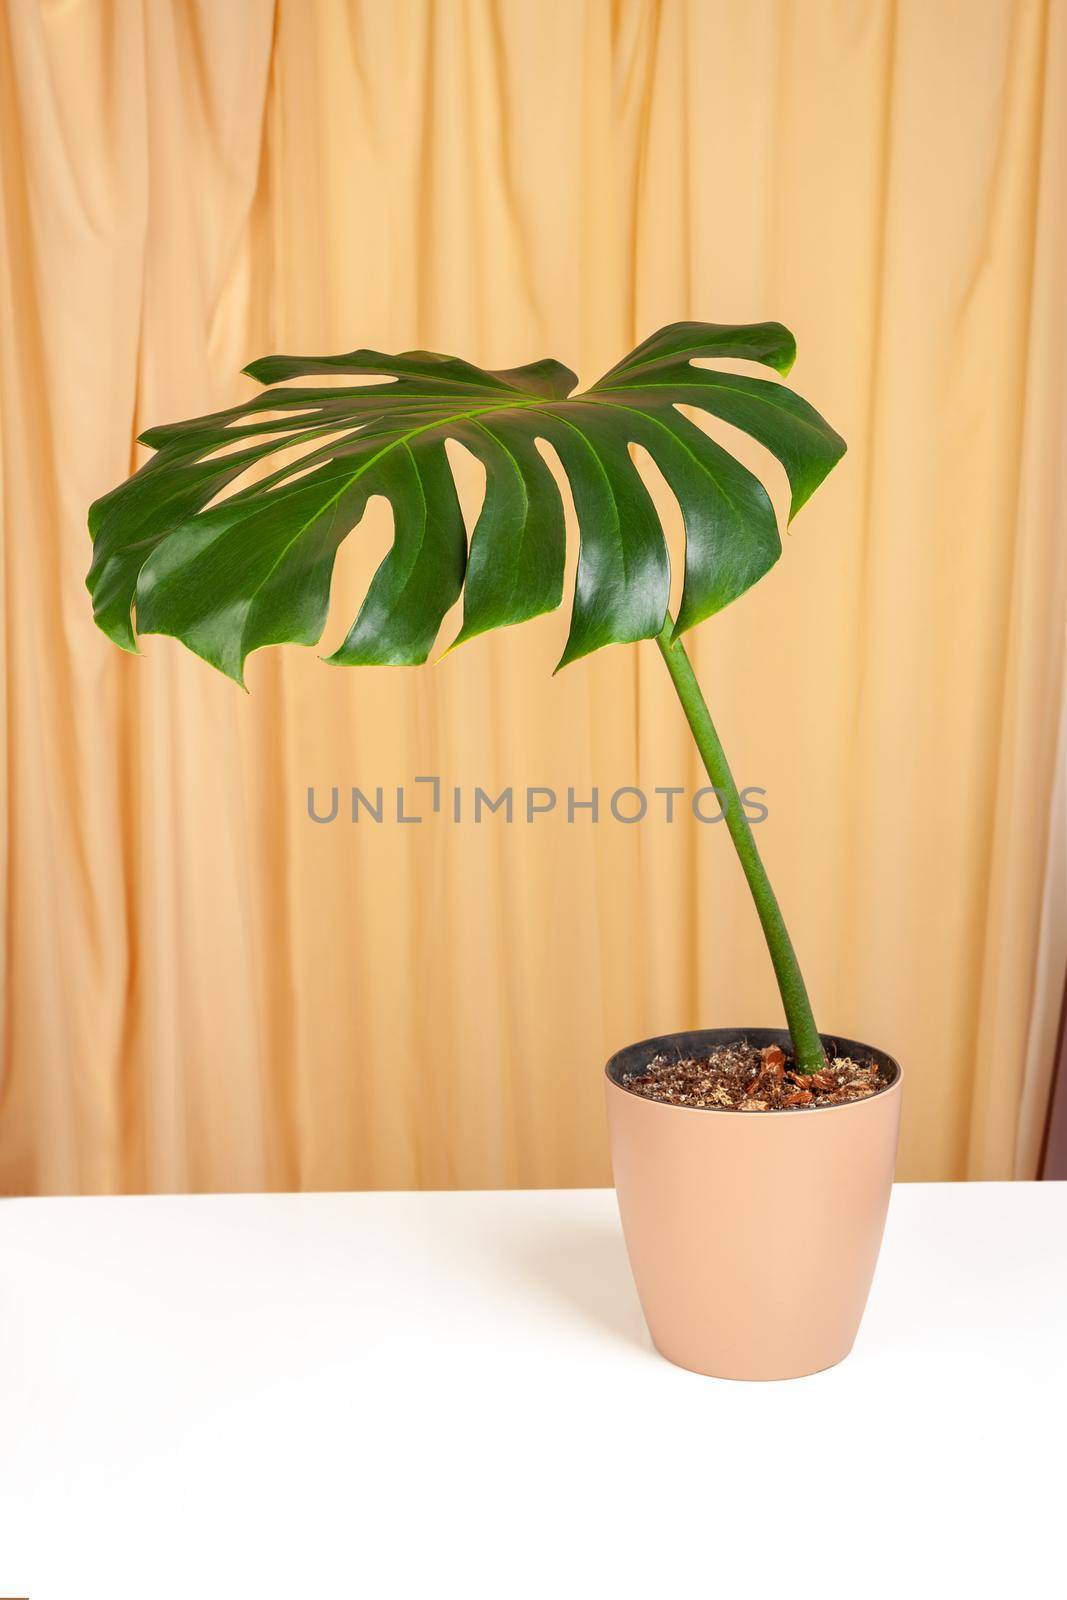 Monstera Deliciosa plant in brown platic pot on a fabric curtains background.